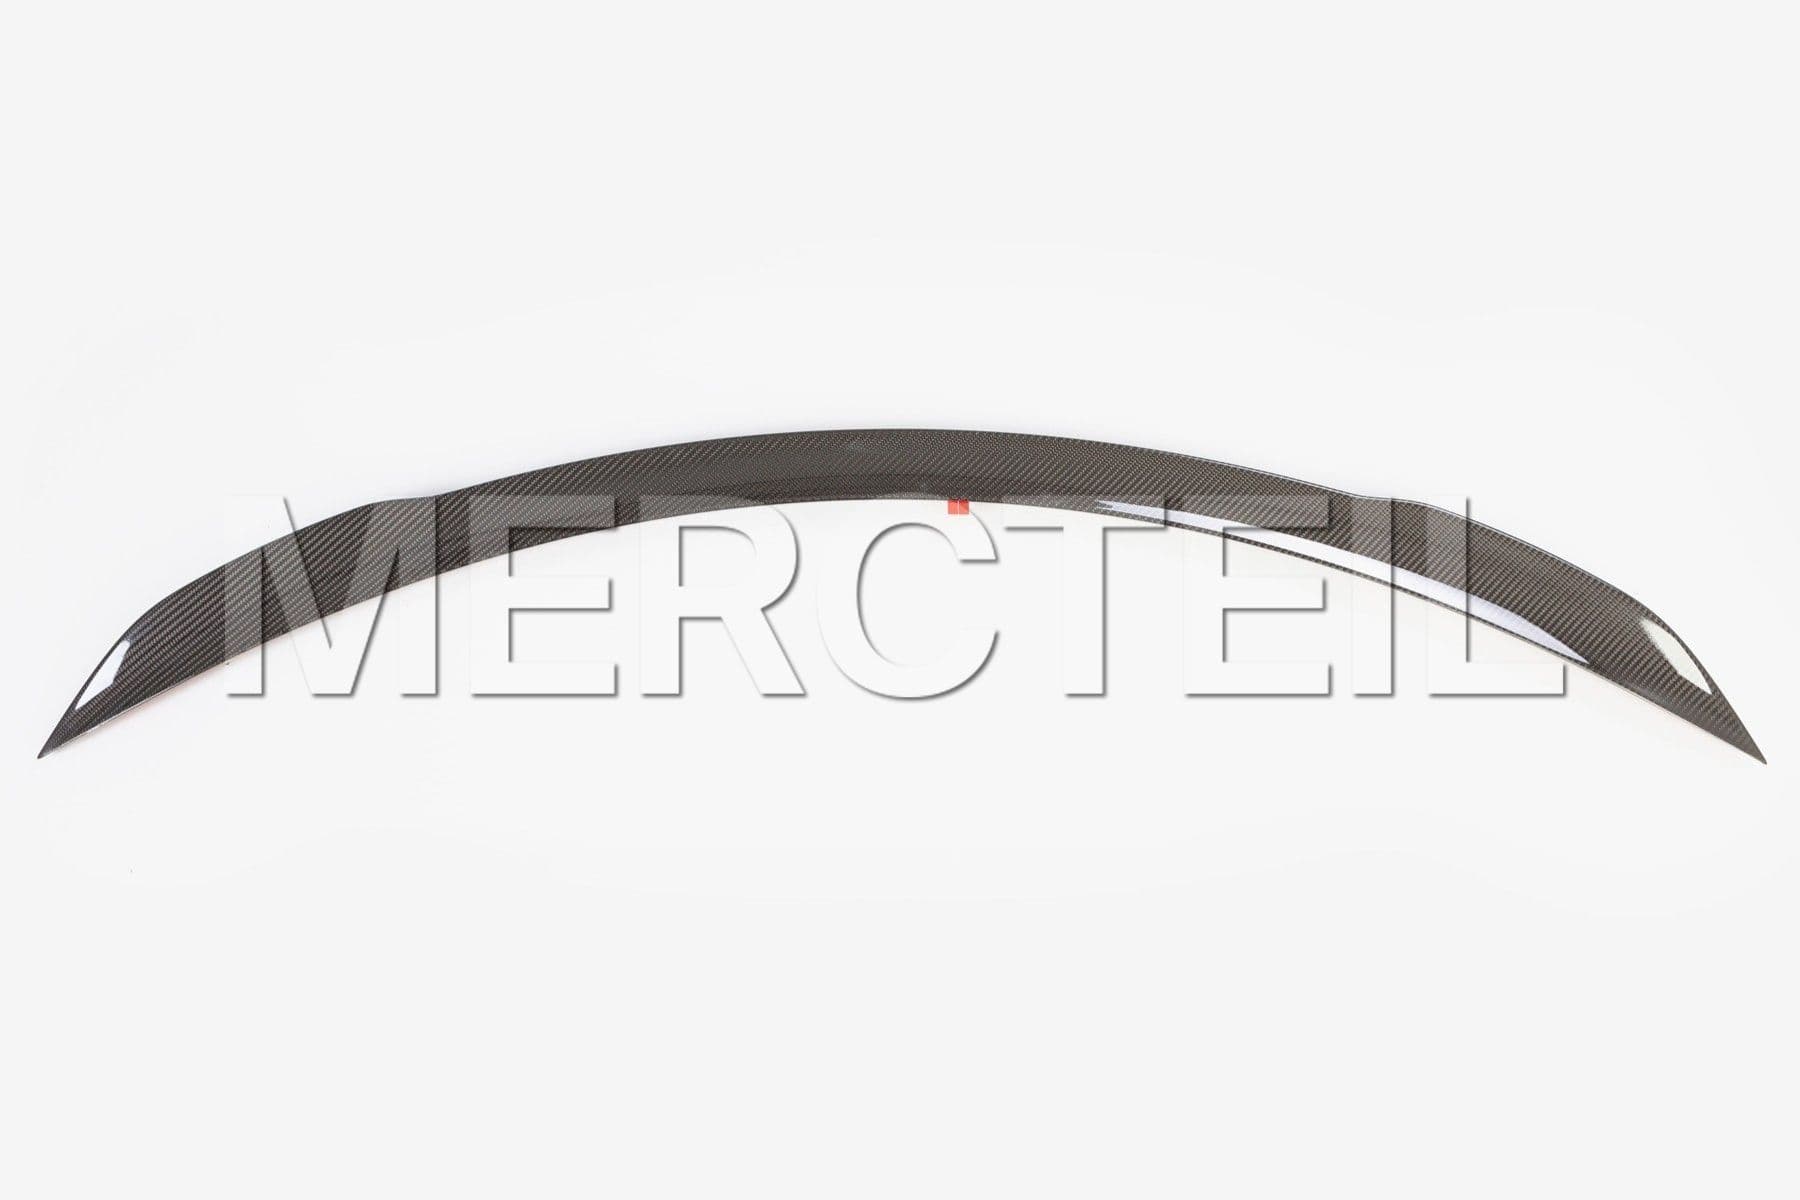 Carbon Aerodynamic Spoiler C Class Coupe C205 Genuine Mercedes AMG (part number: A2057902000)